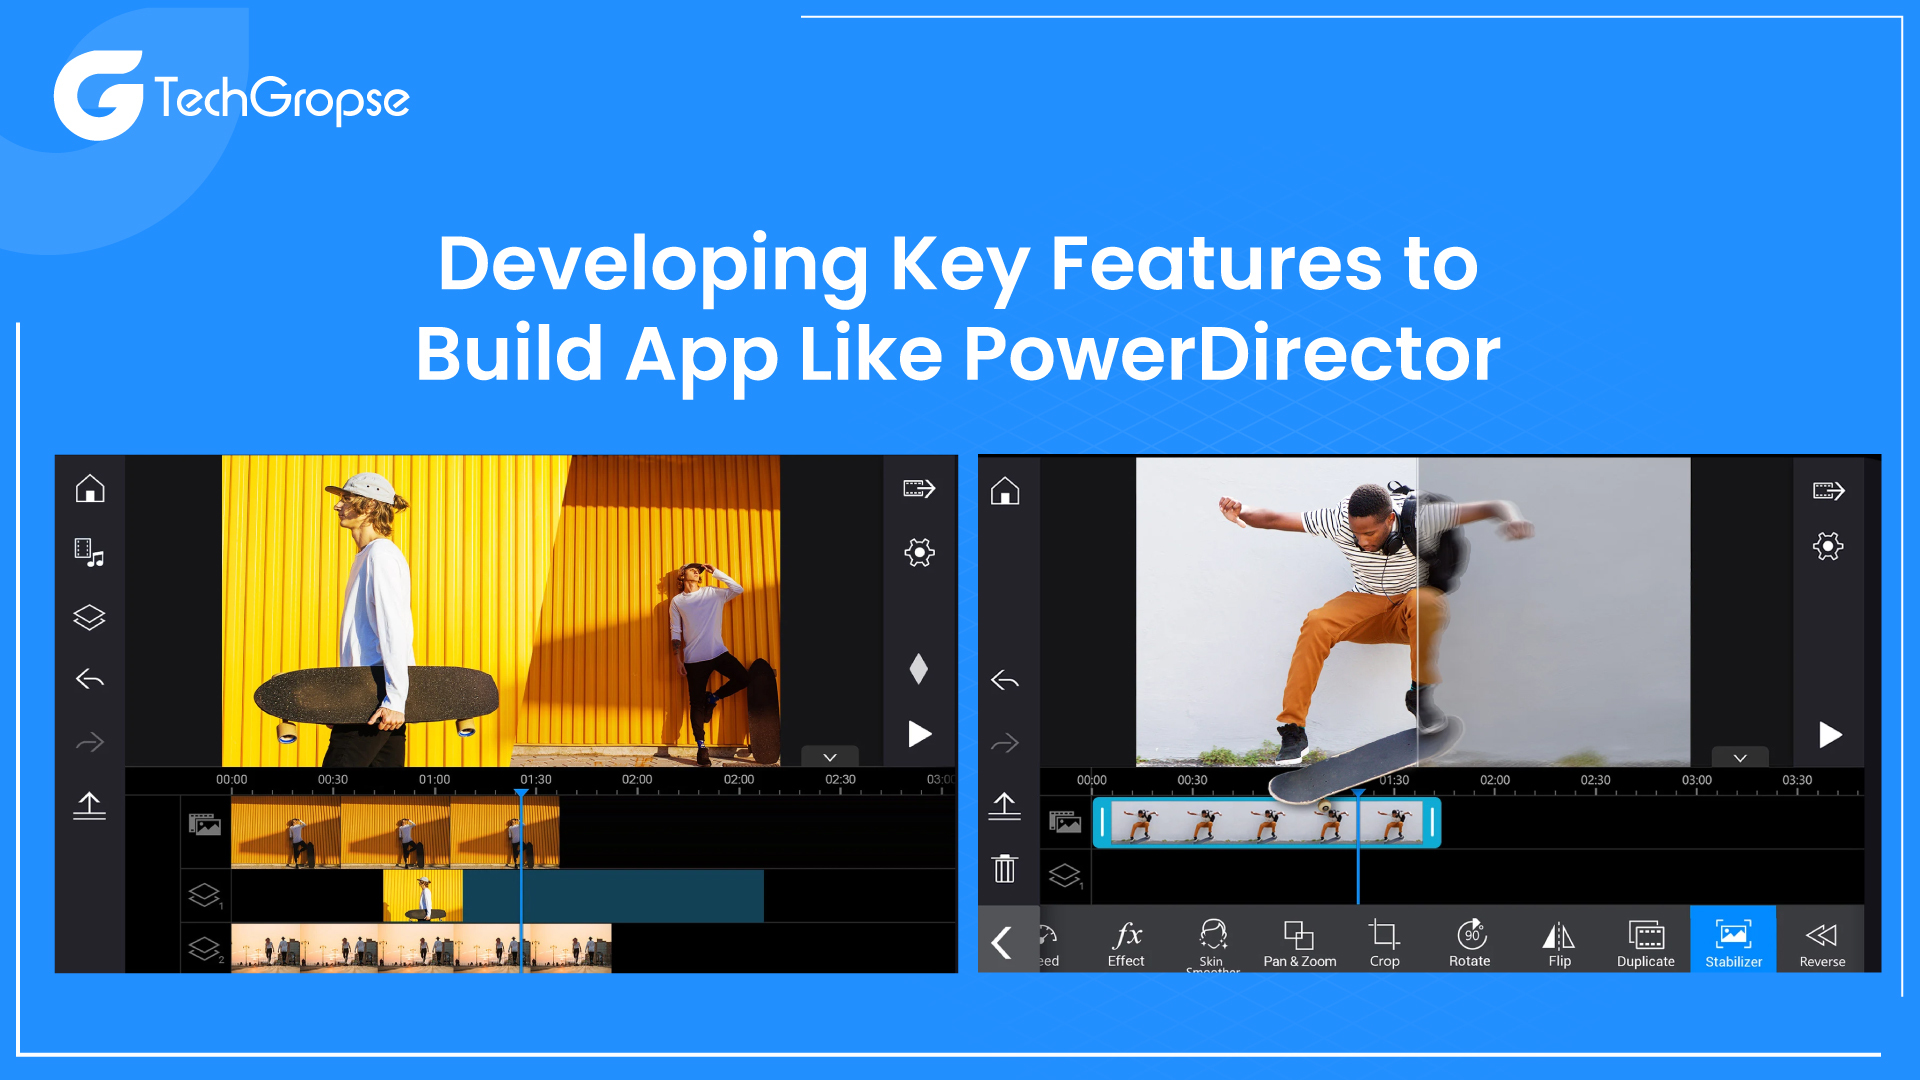 Developing Key Features to Build App Like PowerDirector